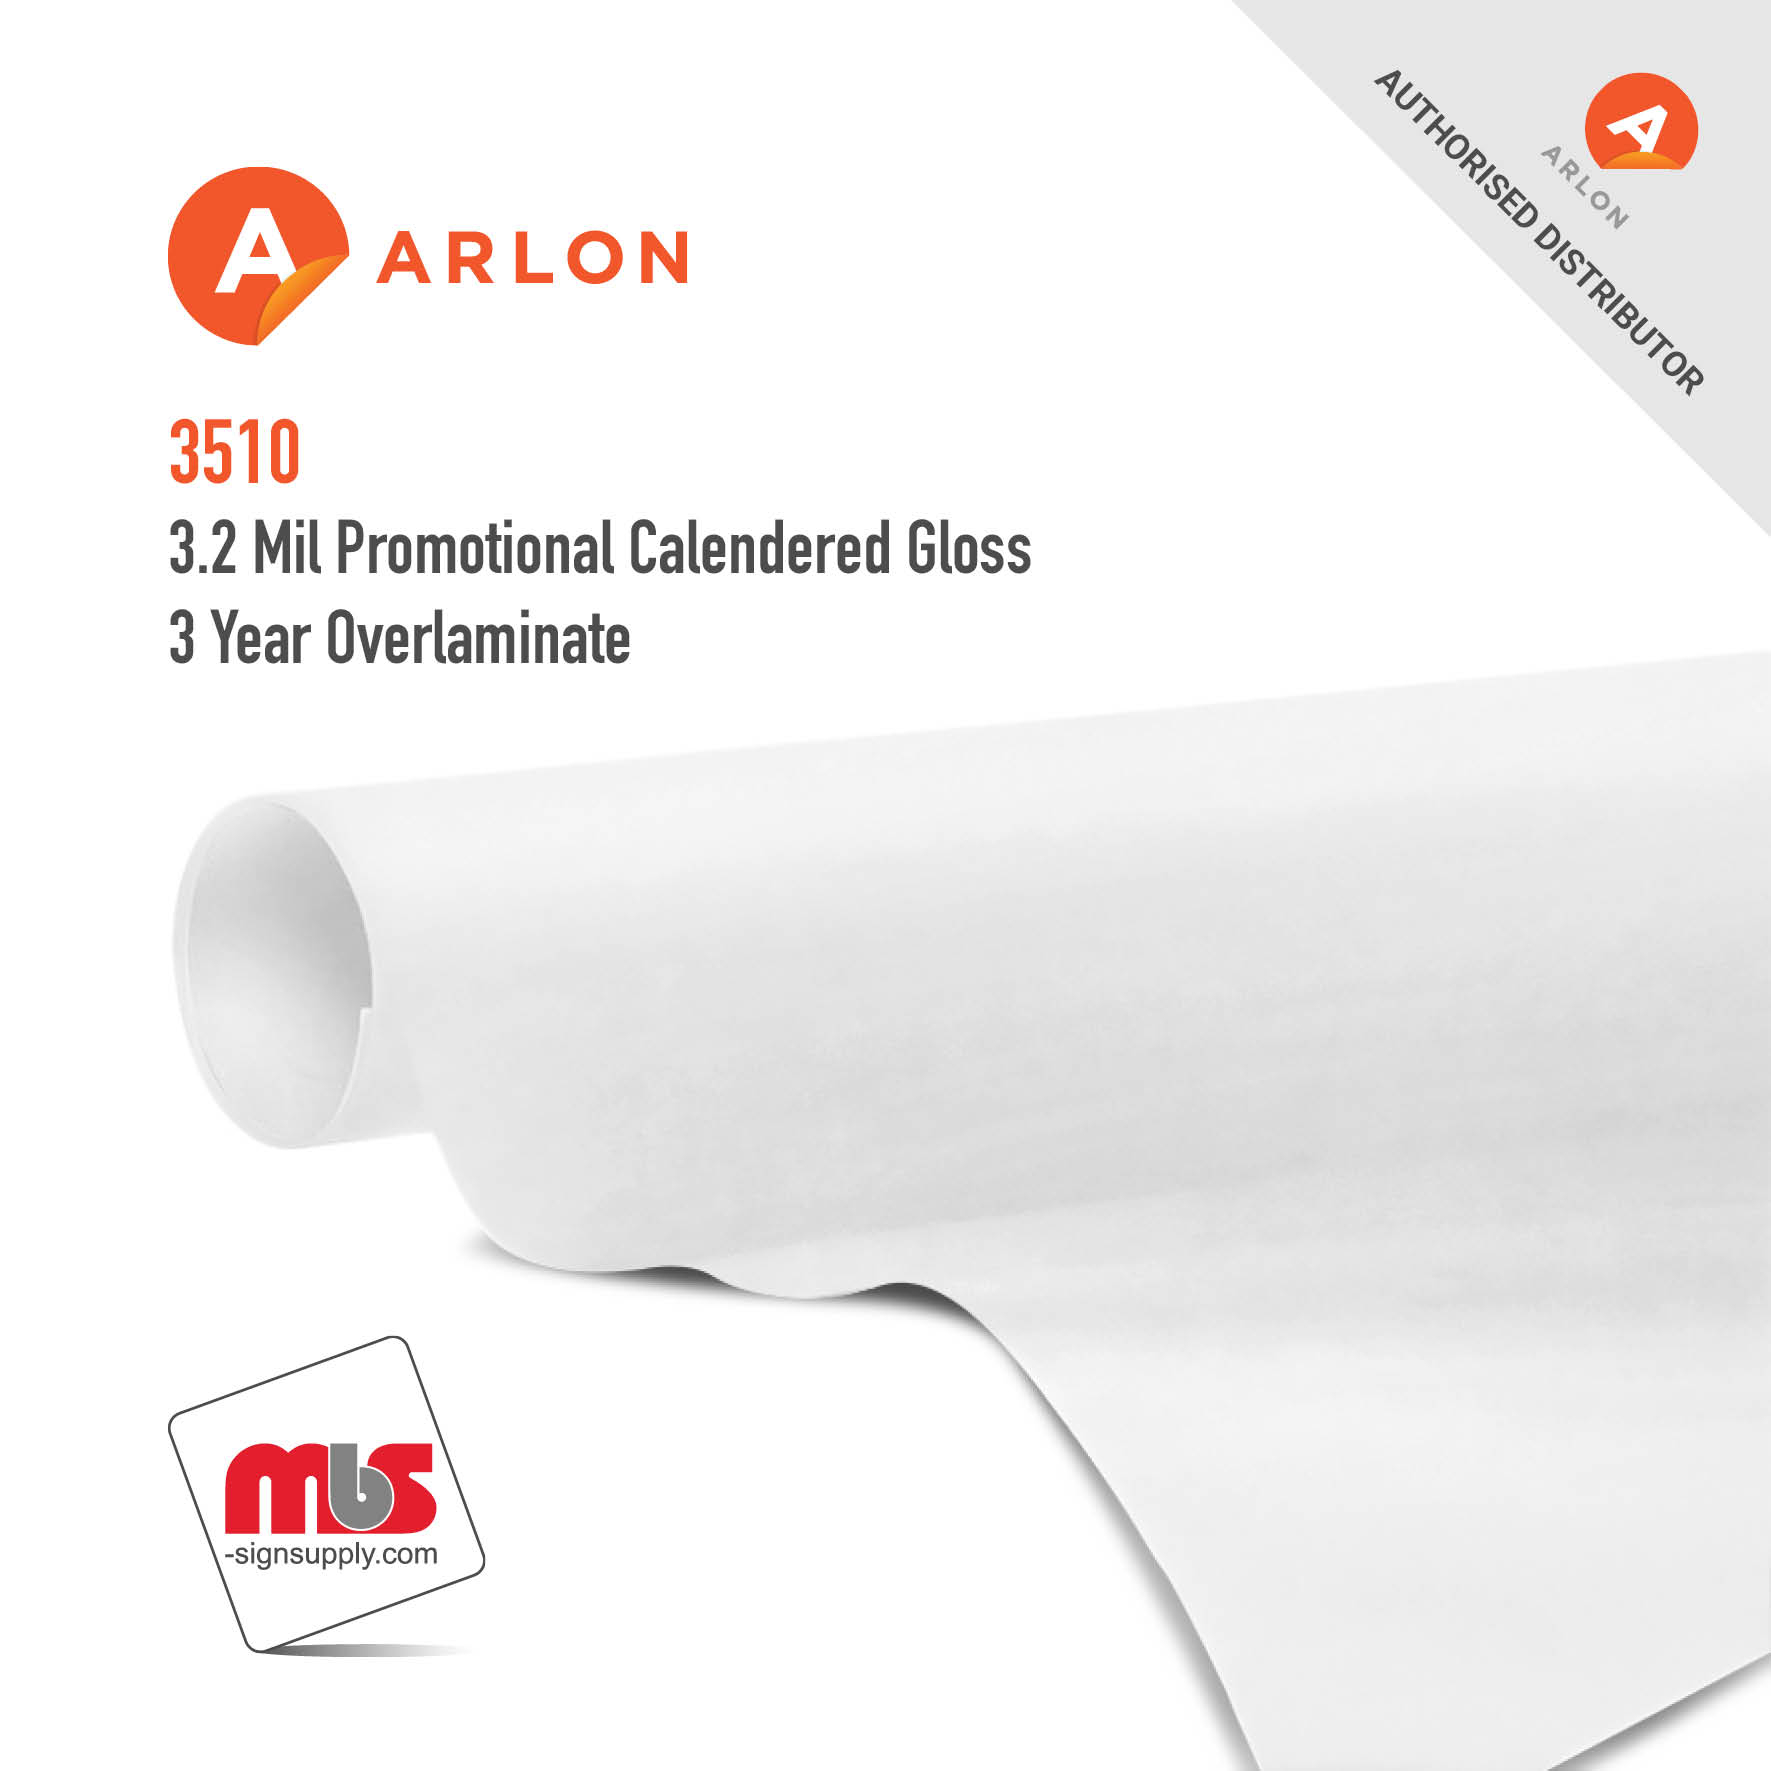 54'' x 50 Yard Roll - Arlon 3510 3.2 Mil Promotional Calendered Gloss 3 Year Overlaminate